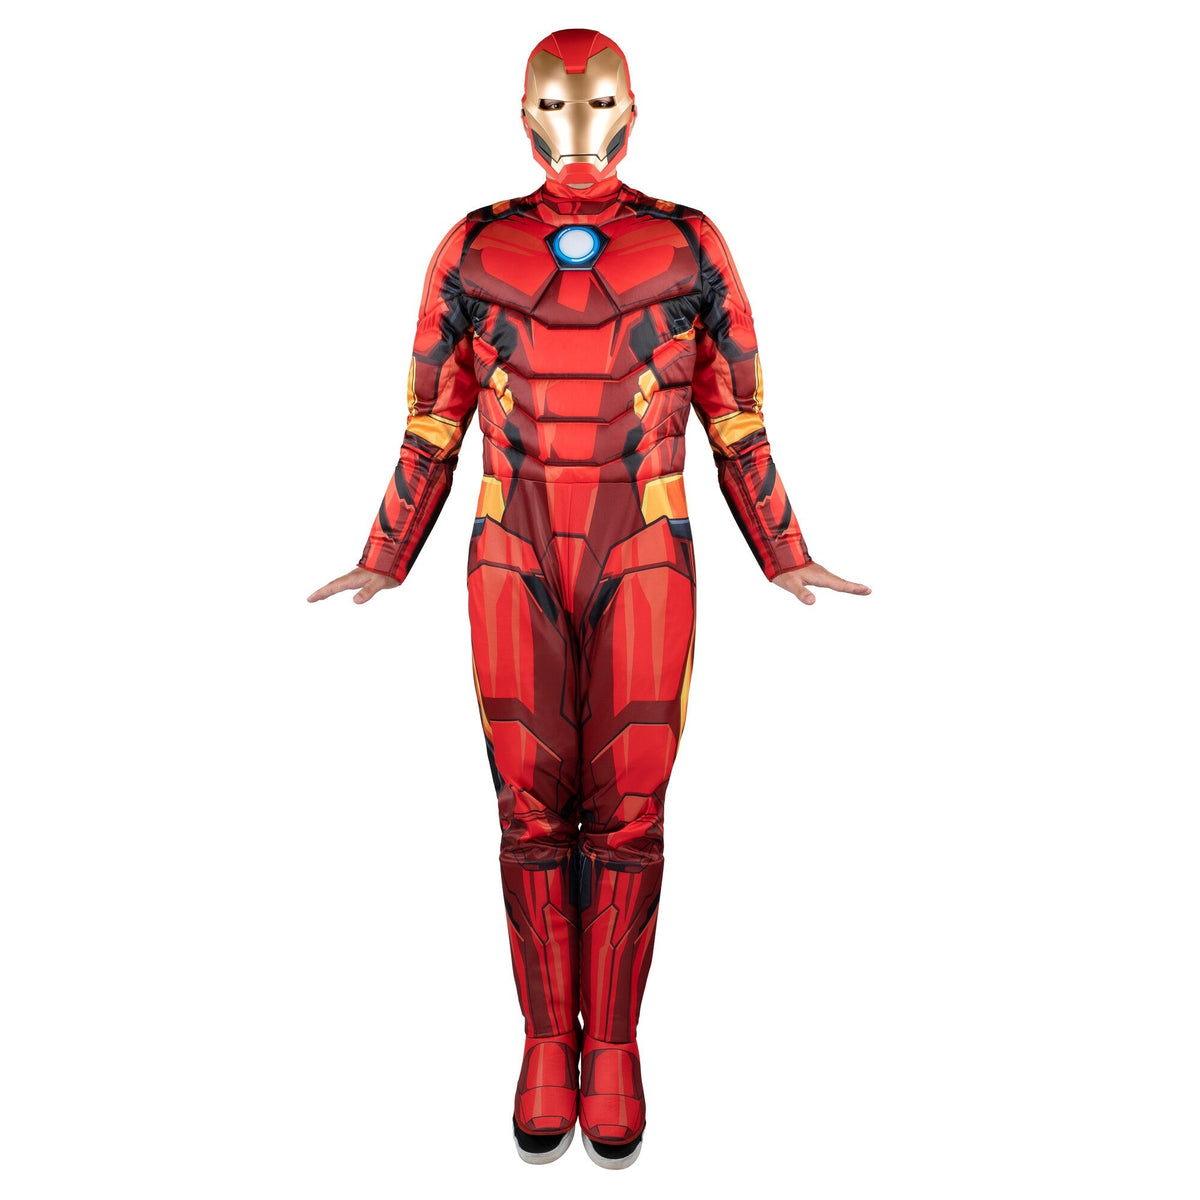 KROEGER Costumes Marvel Iron Man Qualux Costume for Adults, Red Jumpsuit and Mask